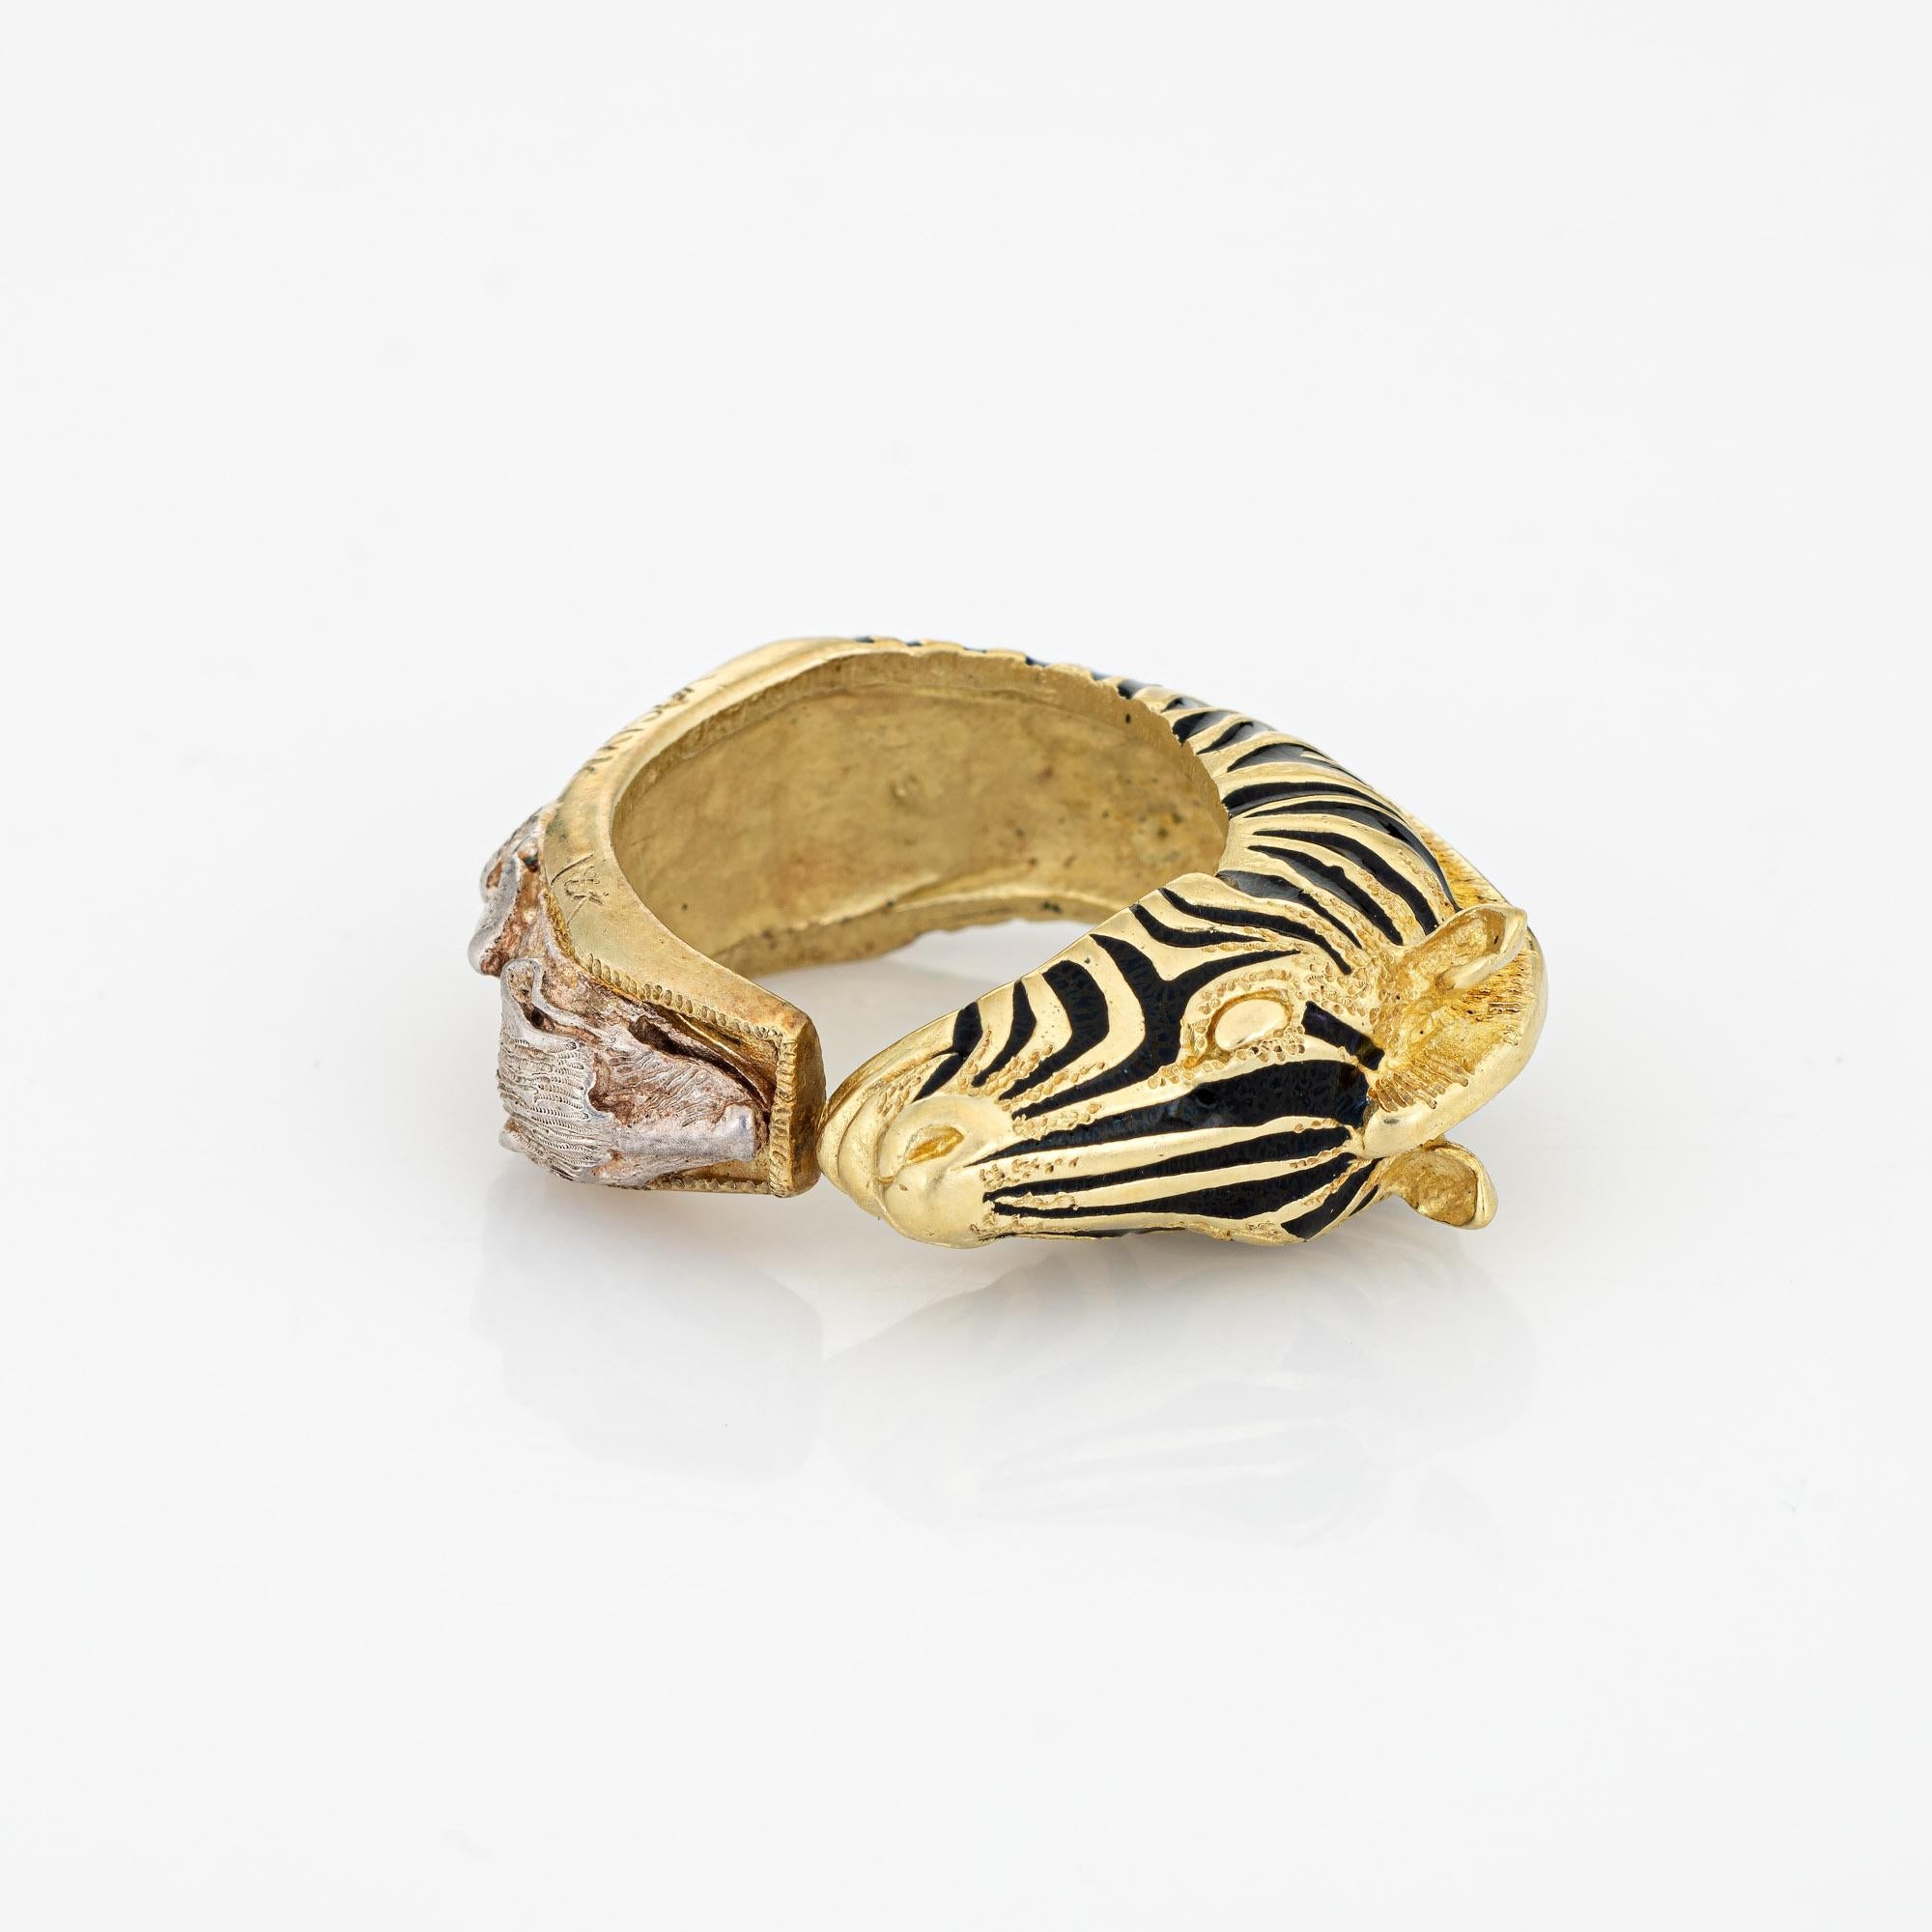 Finely detailed vintage Zebra & Foxes ring crafted in 18 karat yellow gold and sterling silver. 

The beautifully crafted animal themed ring features a lifelike rendering of the bust of a Zebra. To the base of the ring is three fox heads in keeping